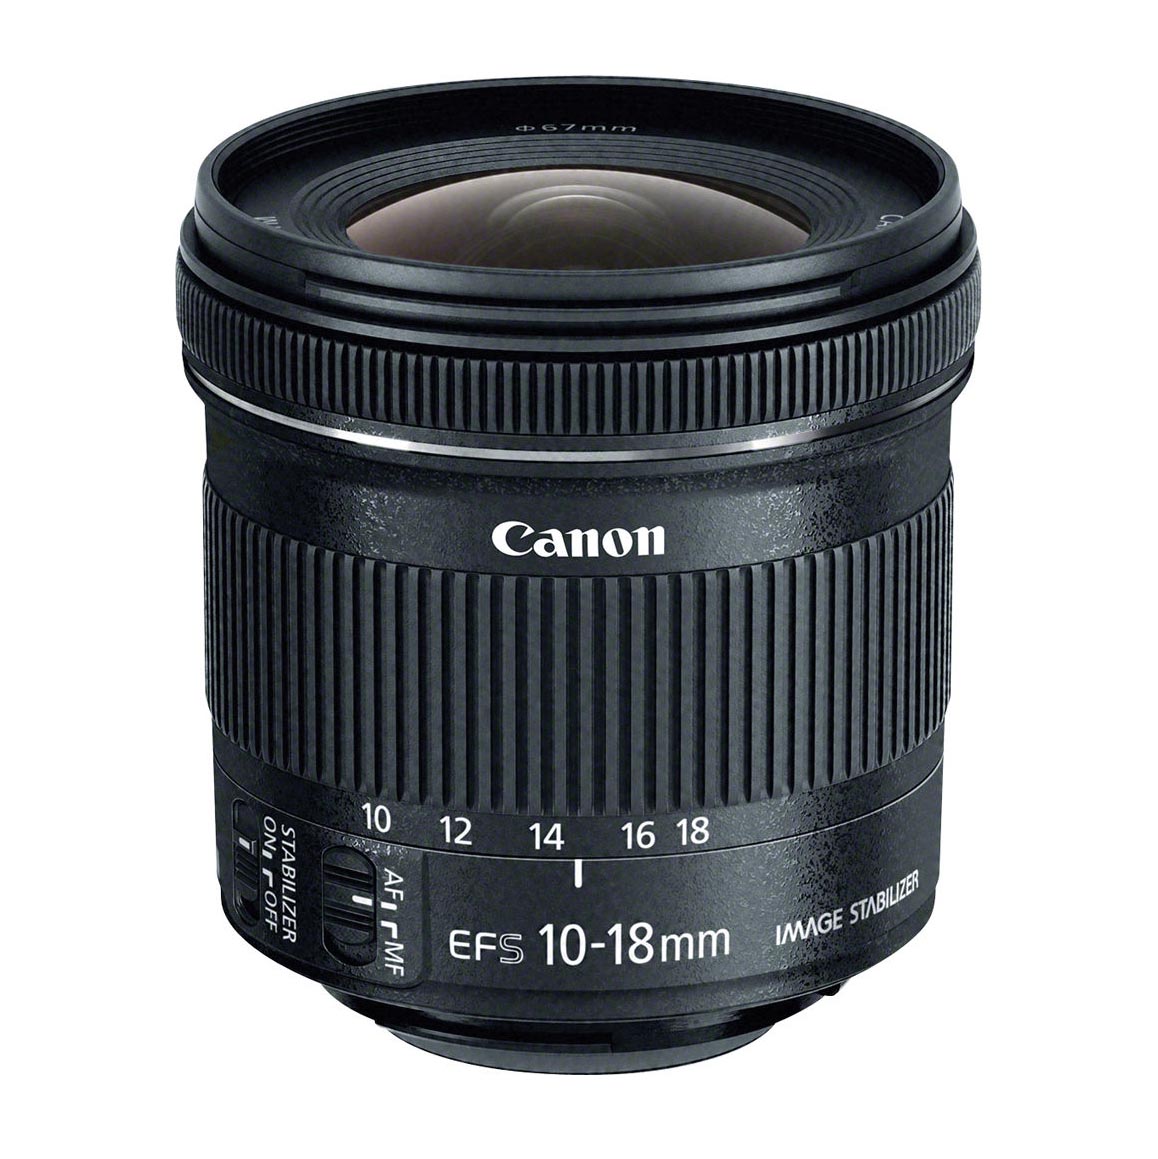 Объектив Canon EF-S 10-18mm f/4.5-5.6 IS STM, черный объектив canon ef m 28mm f 3 5 macro is stm черный